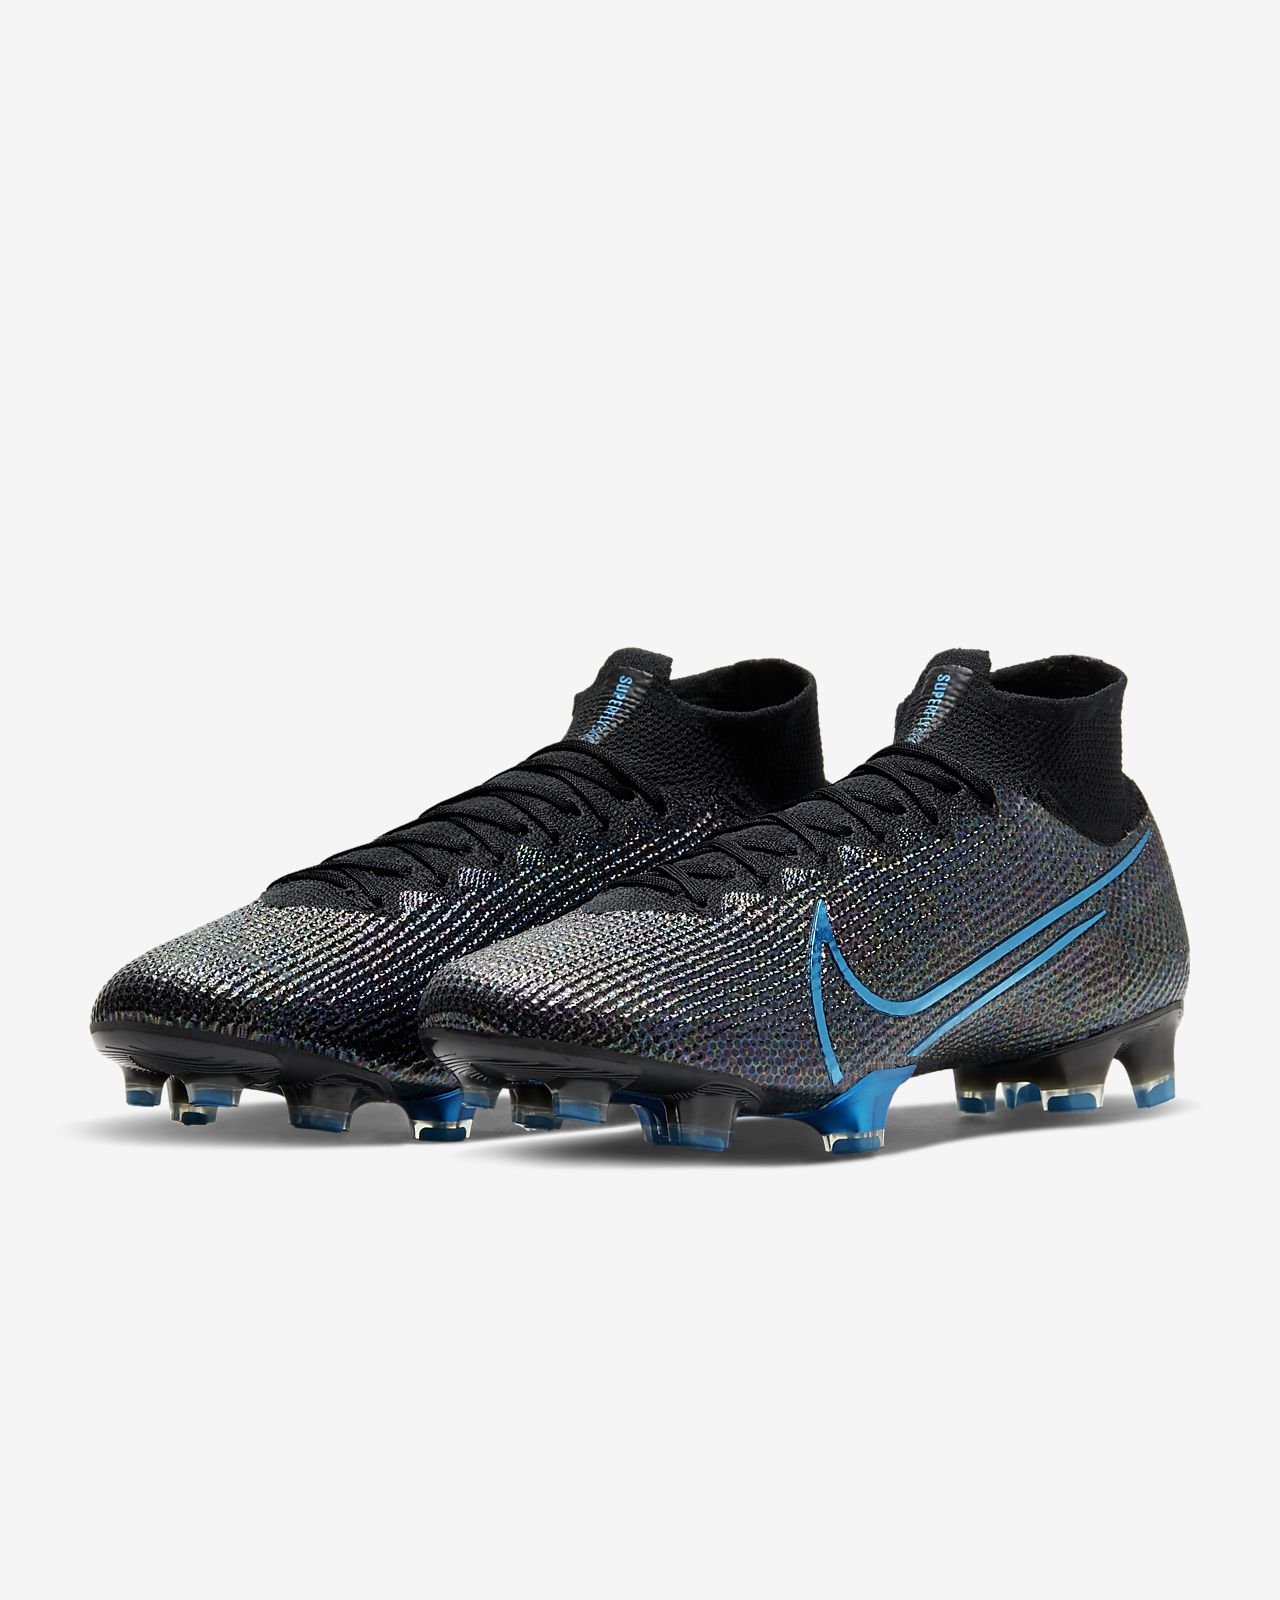 Nike Unisex Adults 'Superfly 7 Pro MDS Fg Soccer Shoe.